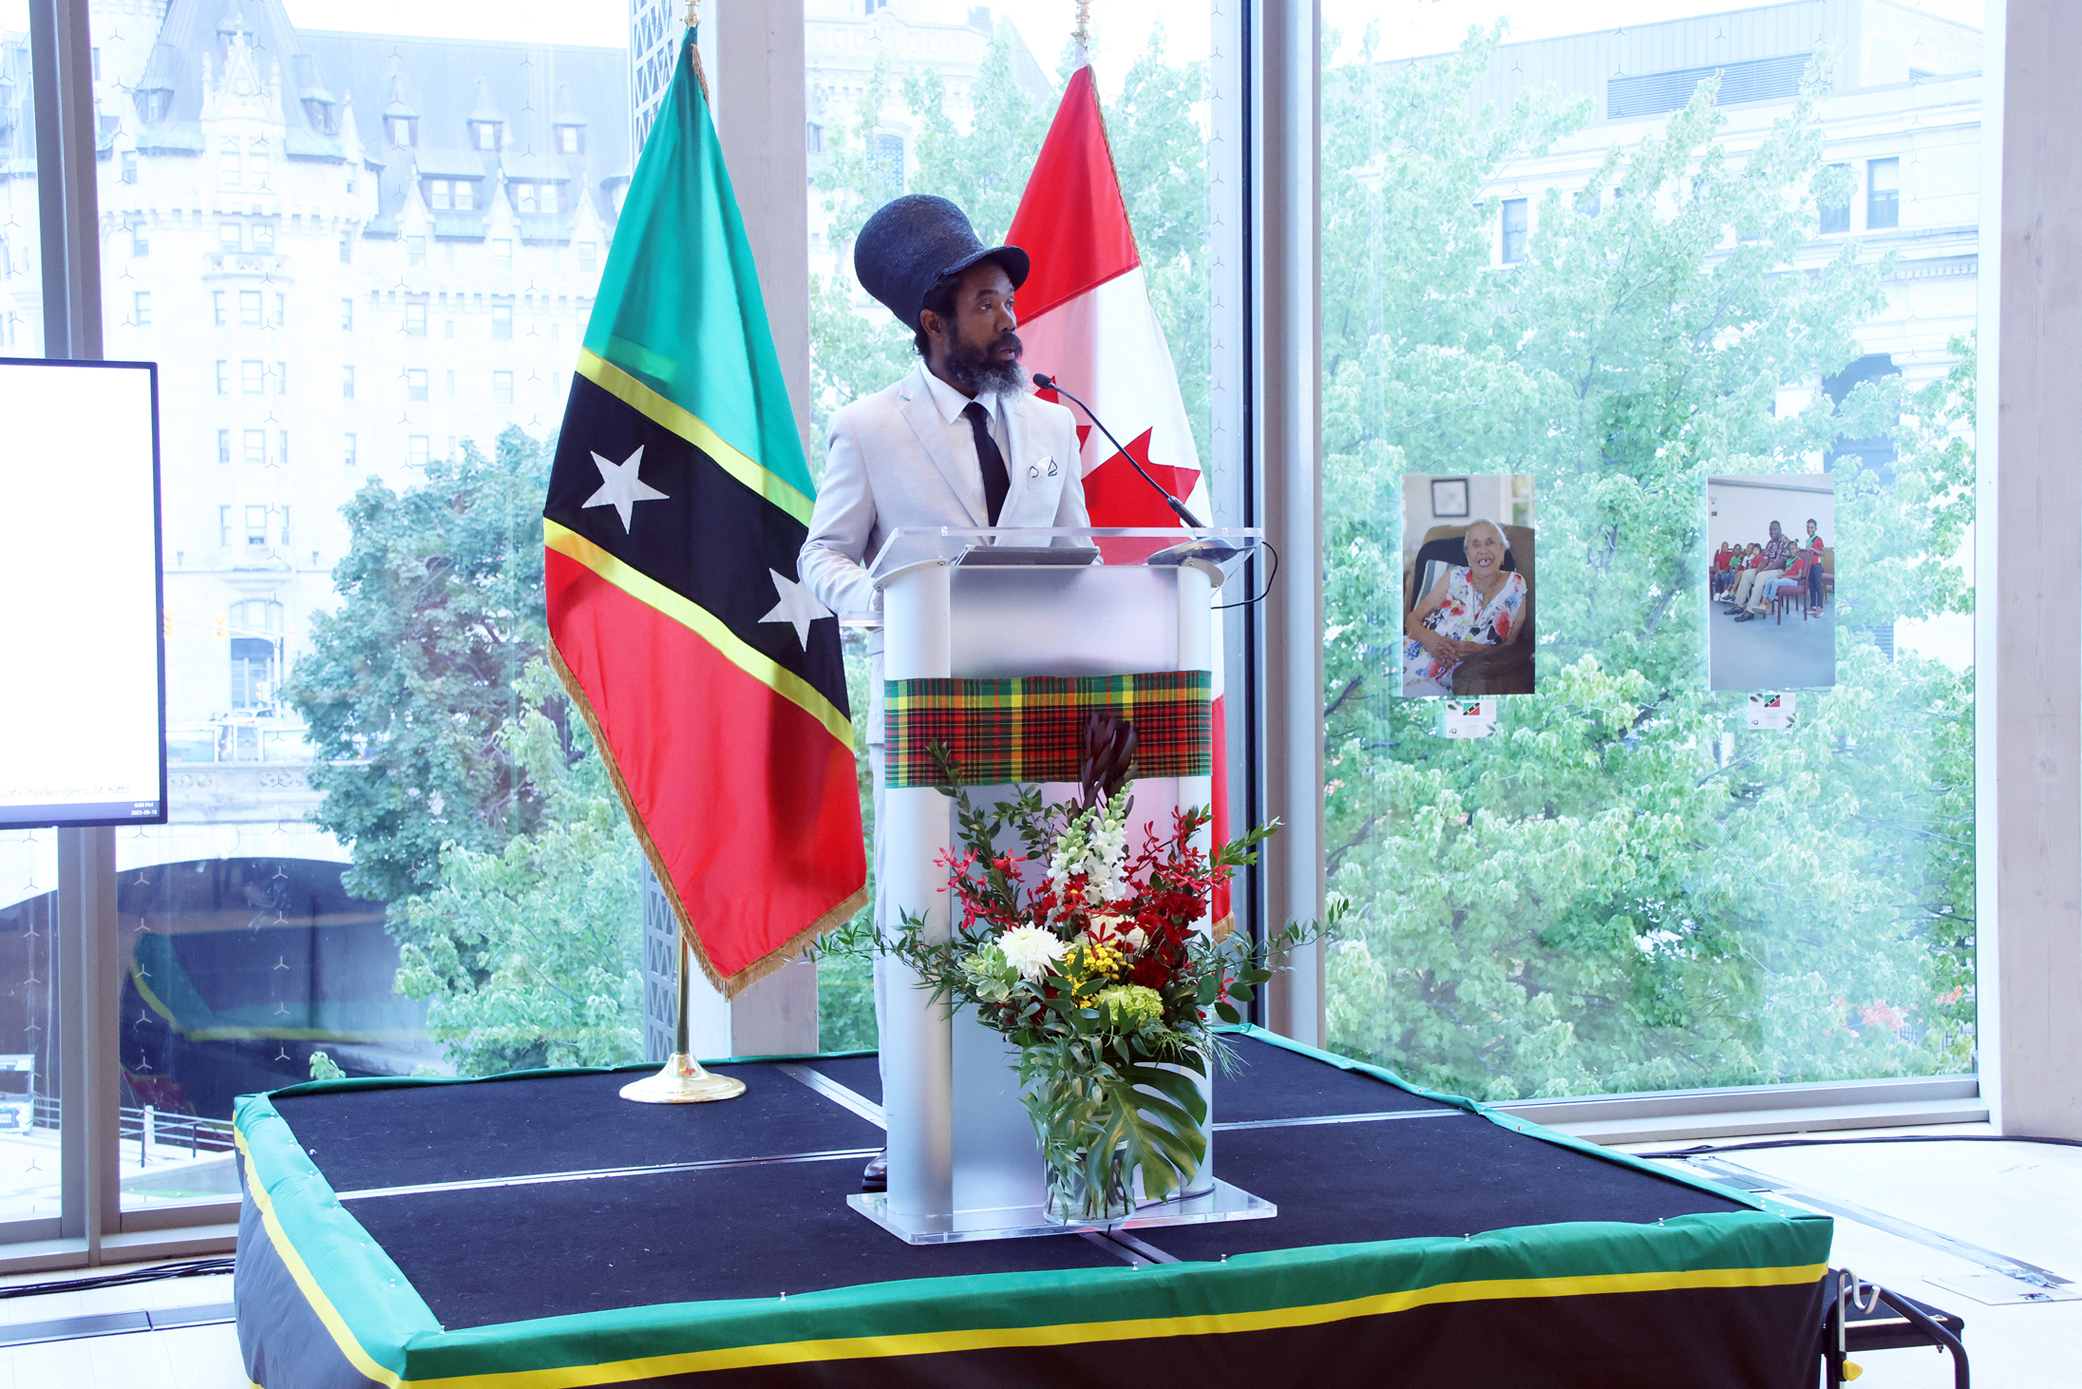 St. Kitts and Nevis High Commission and Prof. Tau Battice showcase St. Kitts and Nevis’s Journey of Independence and Resilience at Canada’s National Arts Center